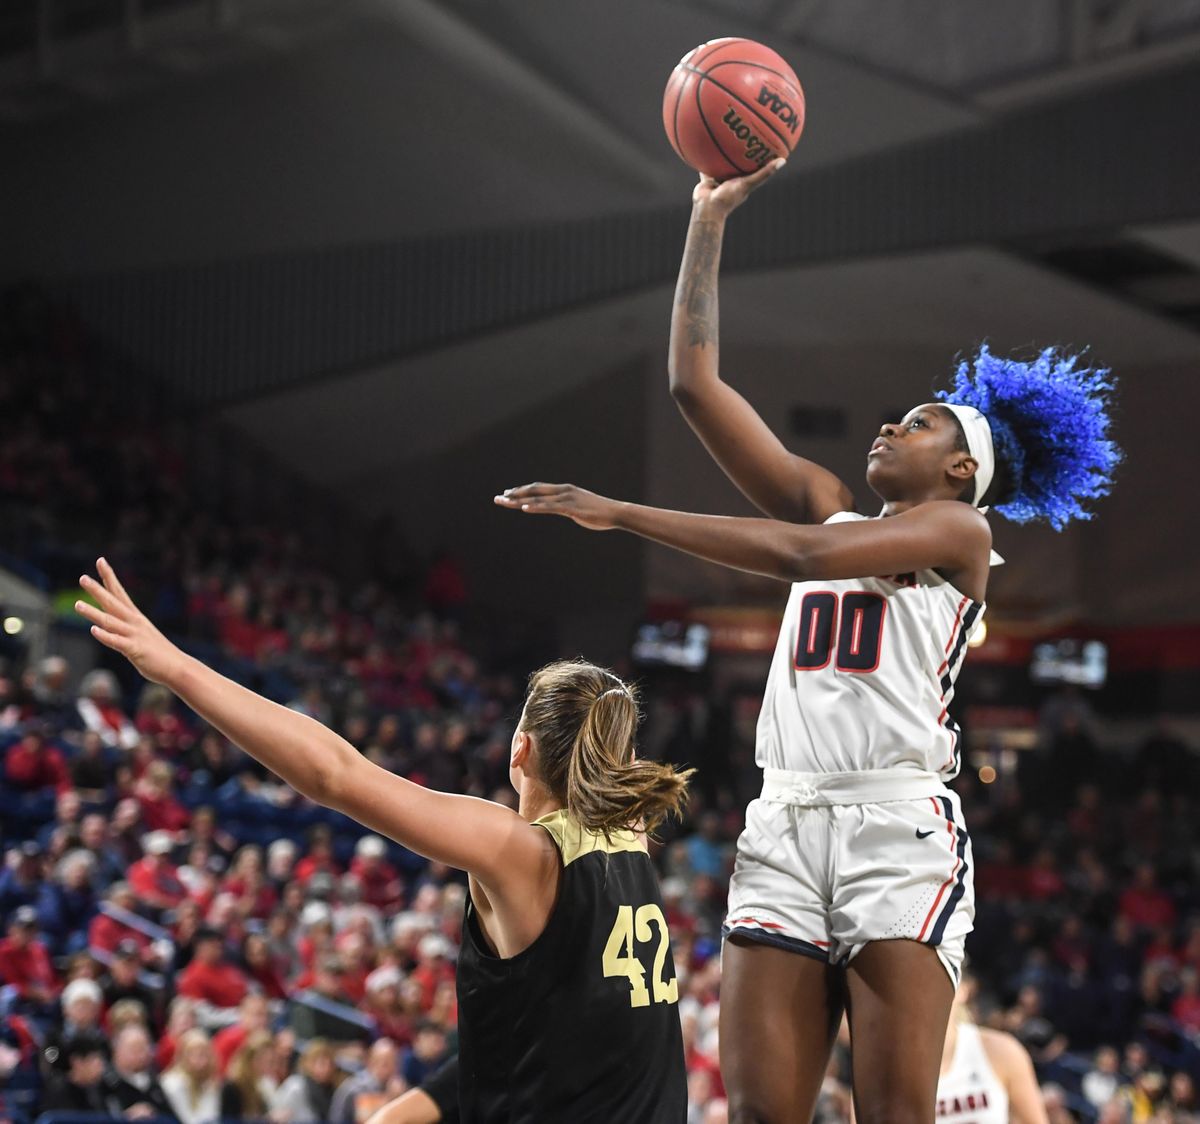 Gonzaga forward Zykera Rice has the soft touch over Idaho forward Natalie Klinker on Dec. 20  in the McCarthey Athletic Center. (Dan Pelle / The Spokesman-Review)